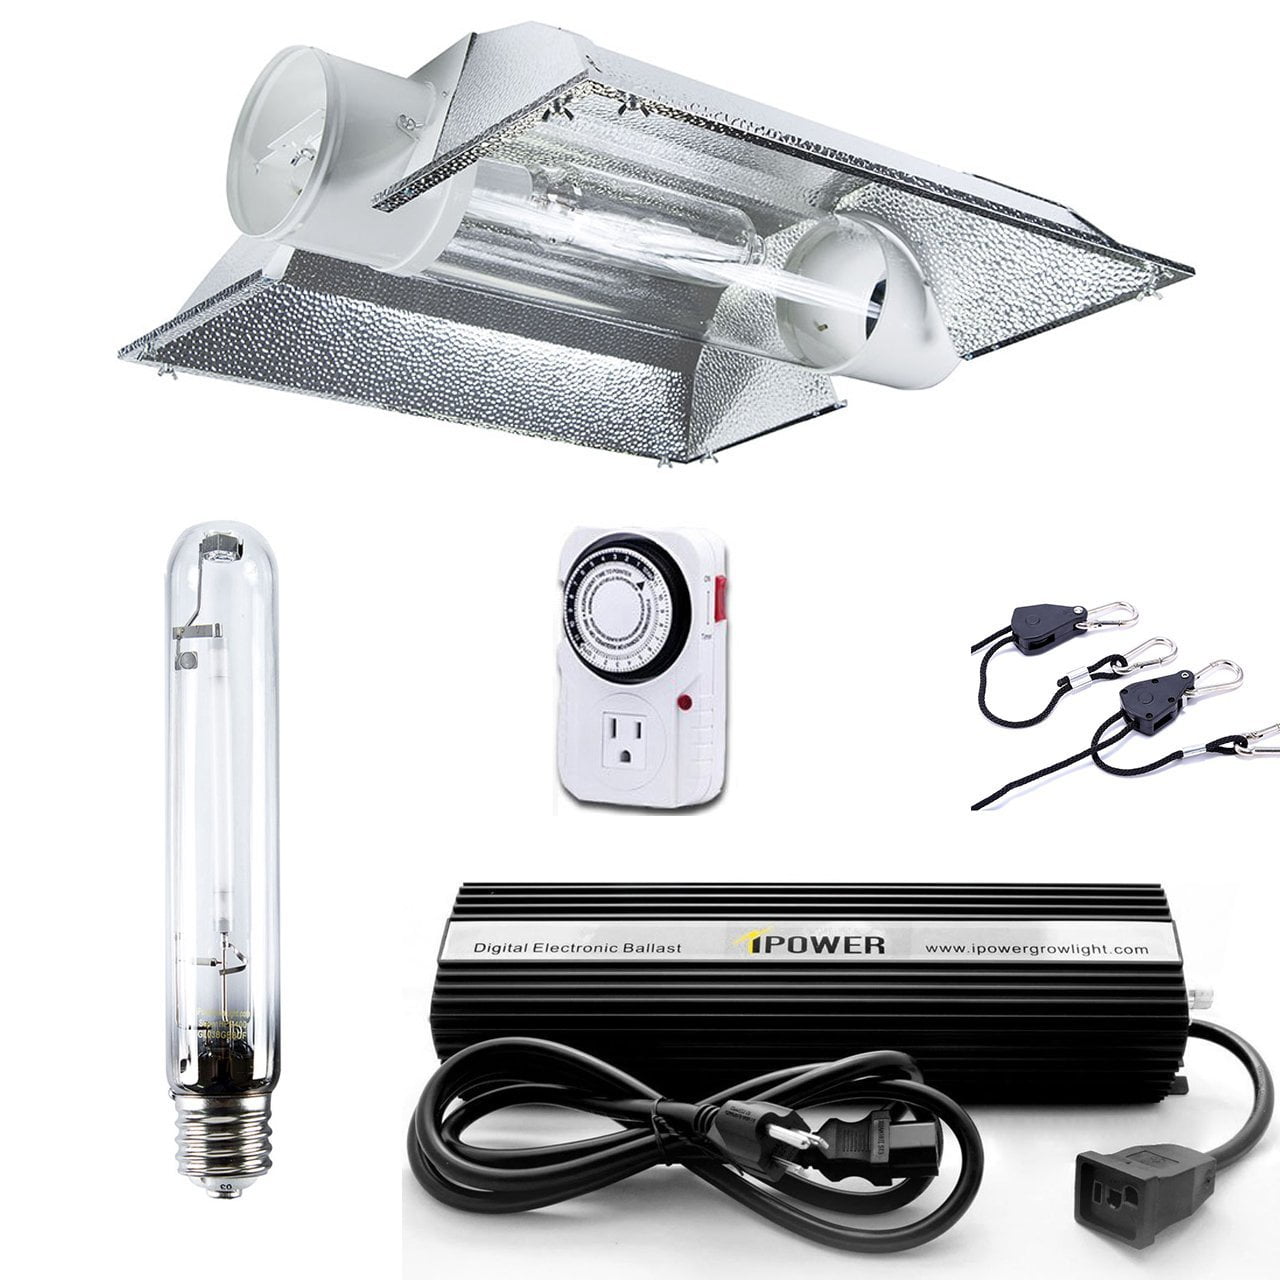 iPower 1000W HPS MH Digital Dimmable Grow Light System kits Air Cooled Hood Set 